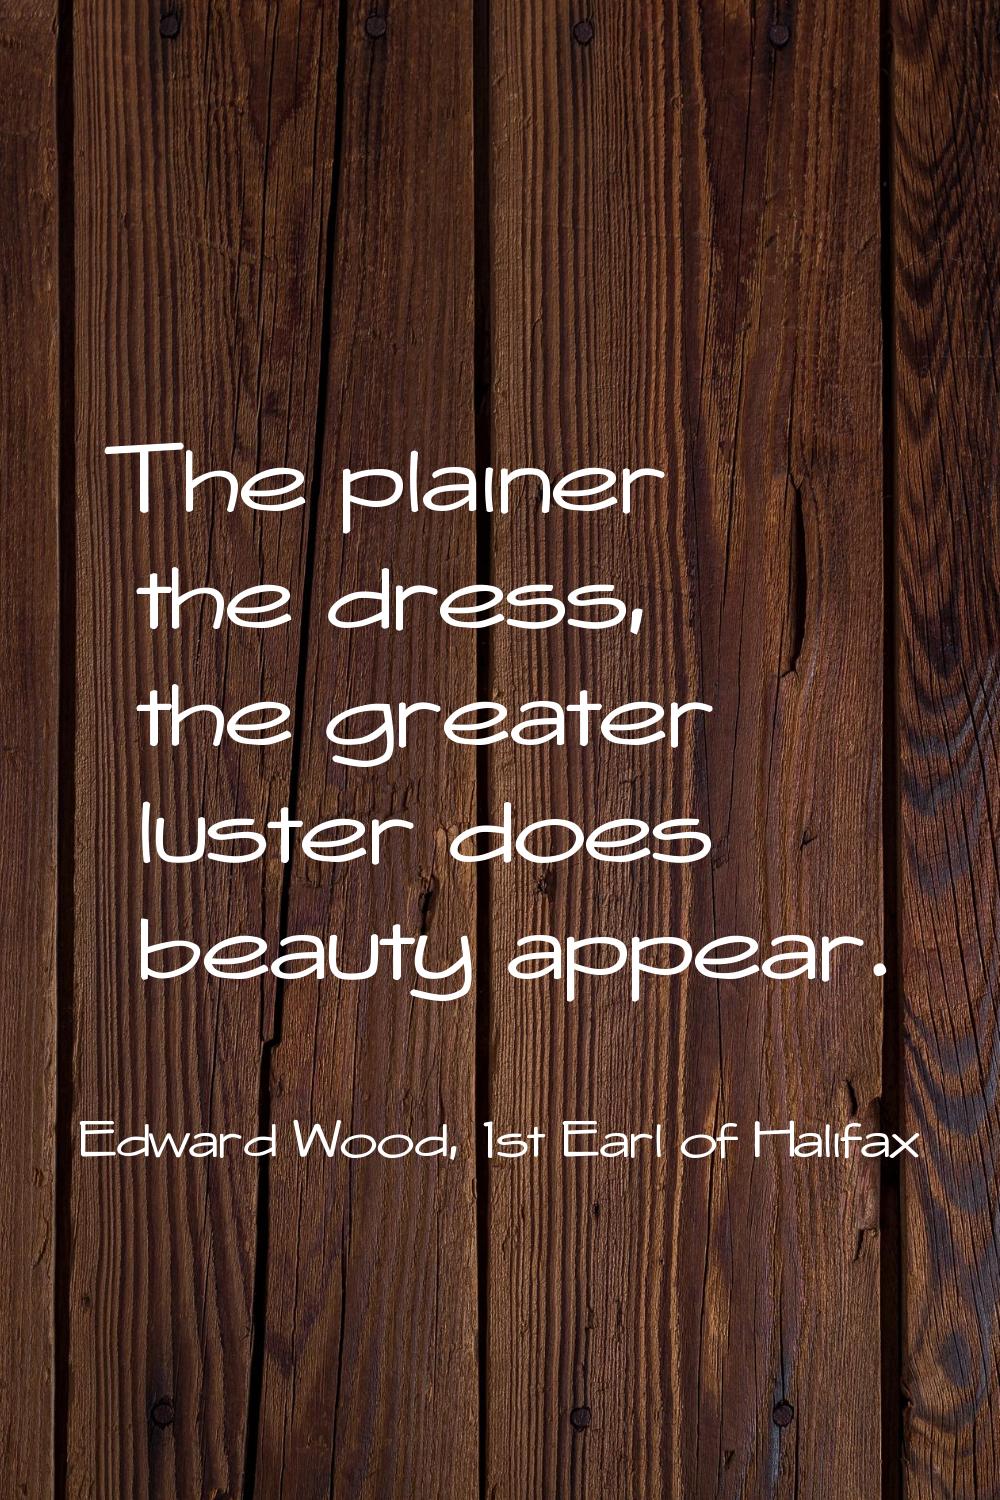 The plainer the dress, the greater luster does beauty appear.